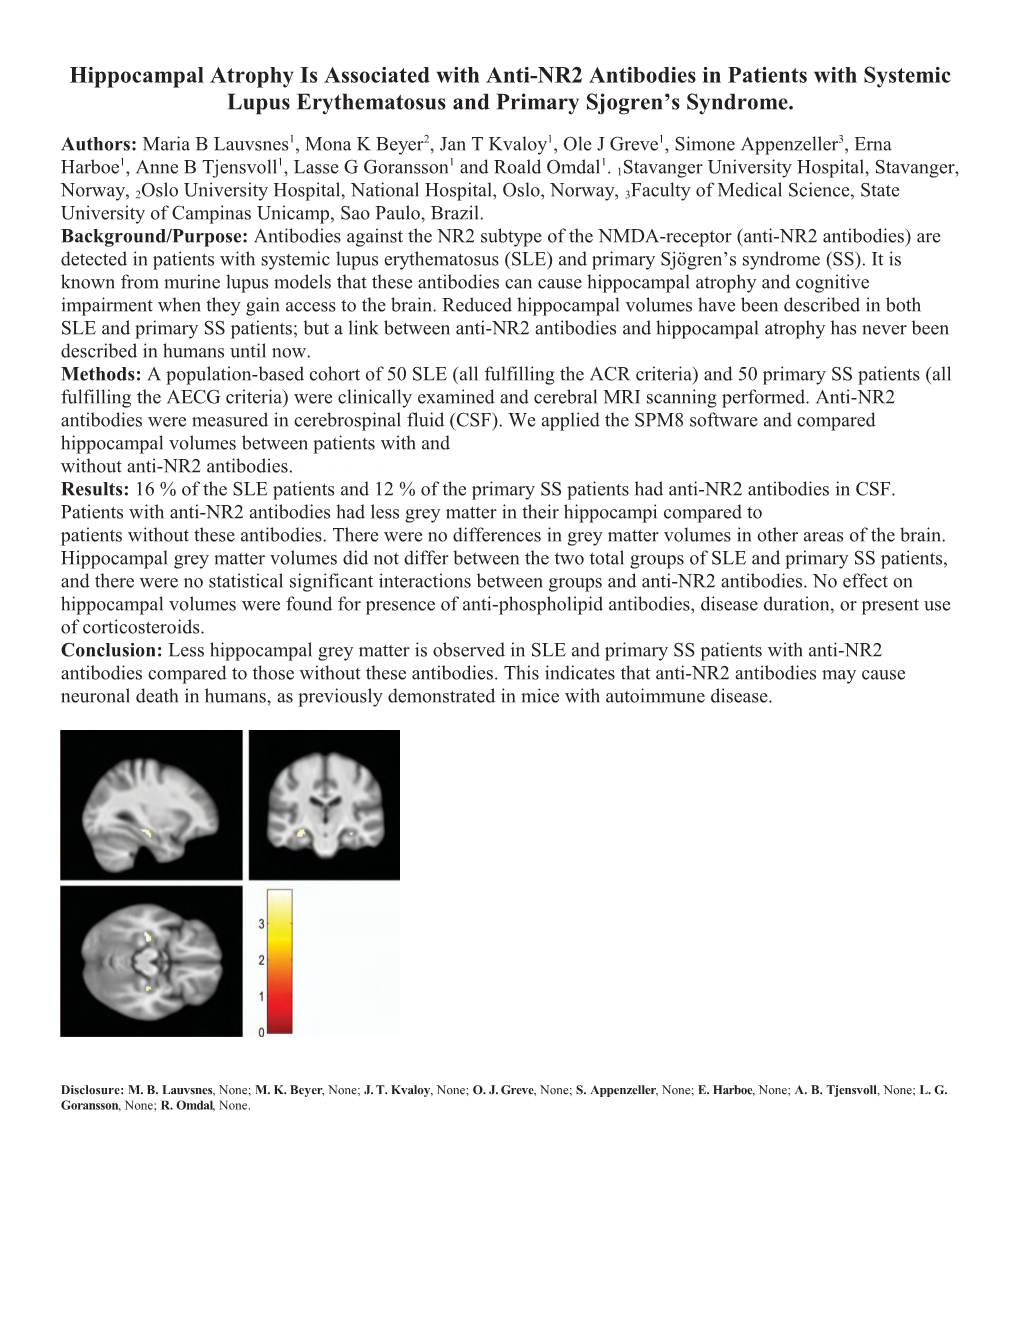 Hippocampal Atrophy Is Associated with Anti-NR2 Antibodies in Patients with Systemic Lupus